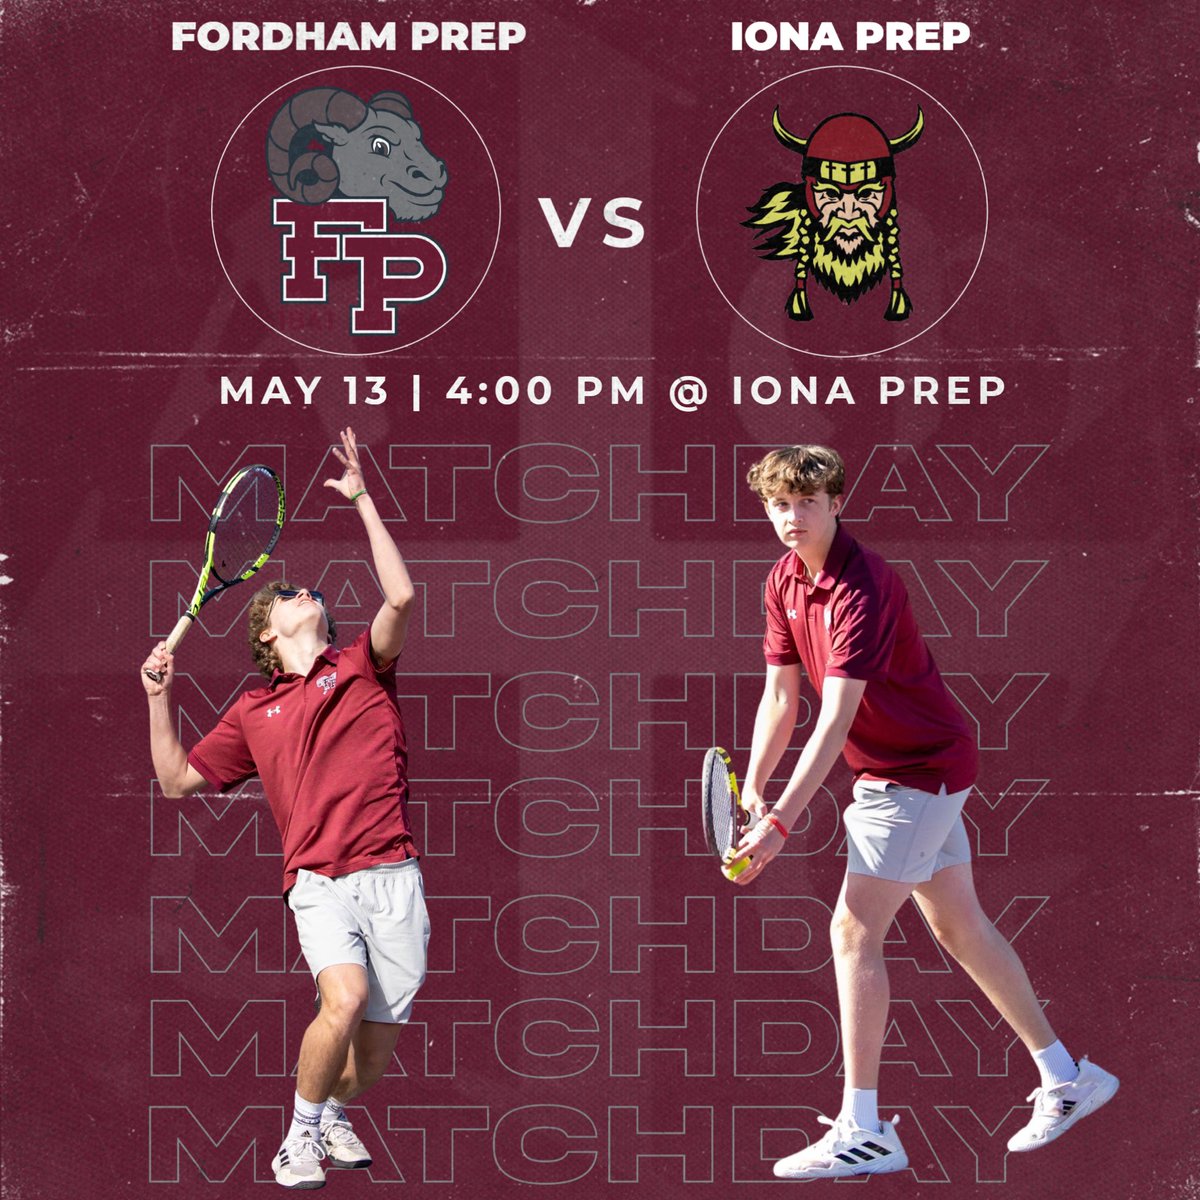 It’s Match Day! Good Luck to our @fordhamprep Varsity Tennis team in today’s match against @ionaprepsports. The Rams will compete at 4:00PM at Iona Prep. Go Rams! 🐏🎾 #AMDG #GoRams #HomeOfChampions